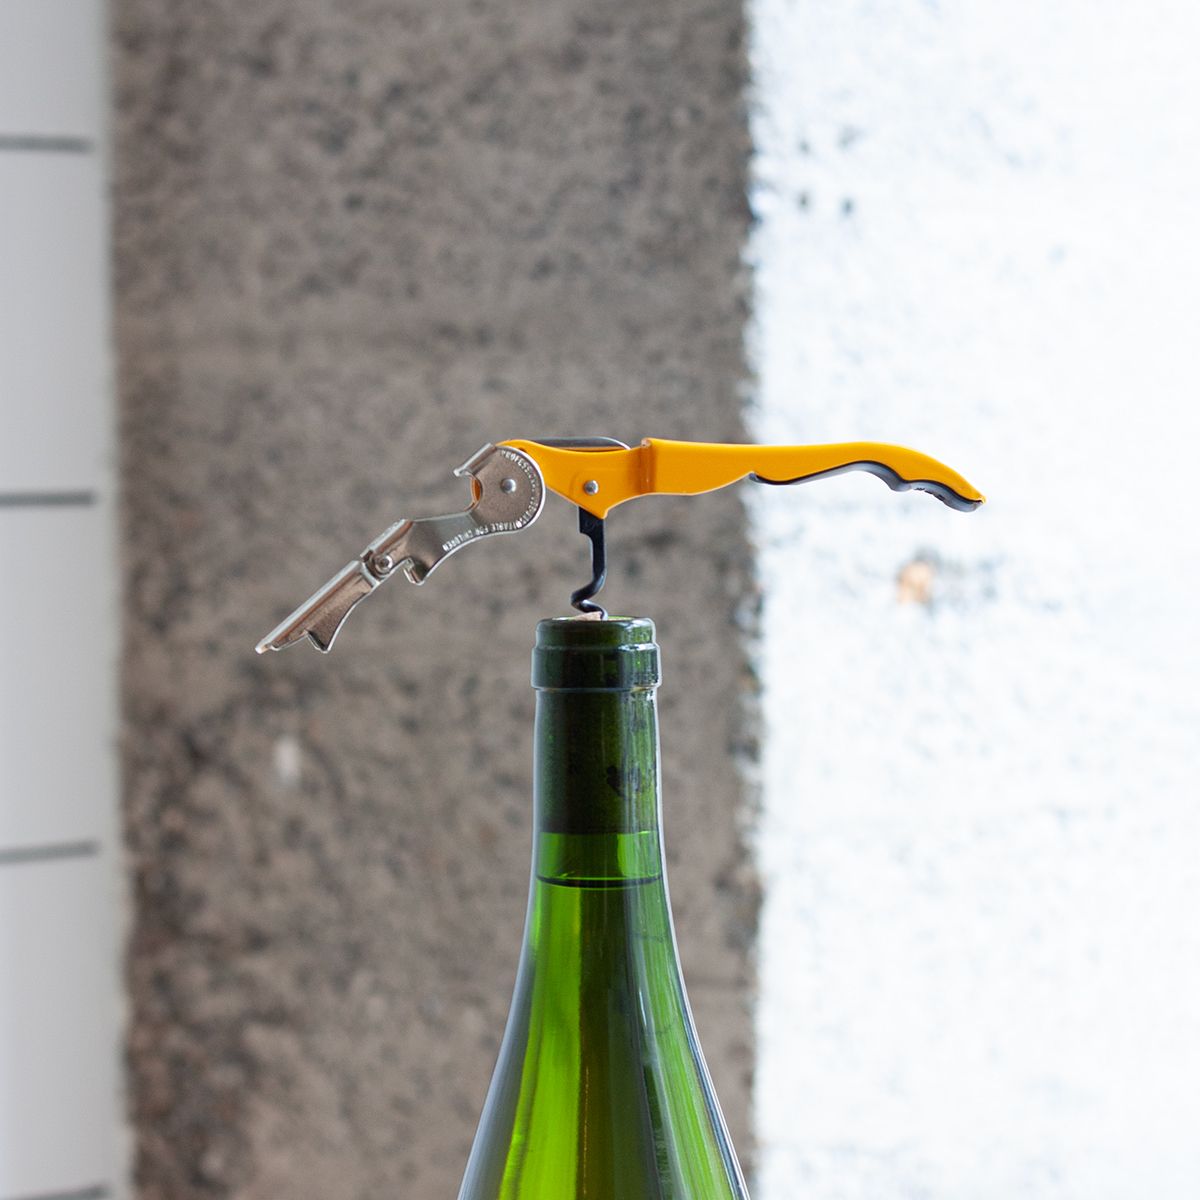 A yellow corkscrew is in action- screwed into the cork of a green glass wine bottle against a gray concrete background.